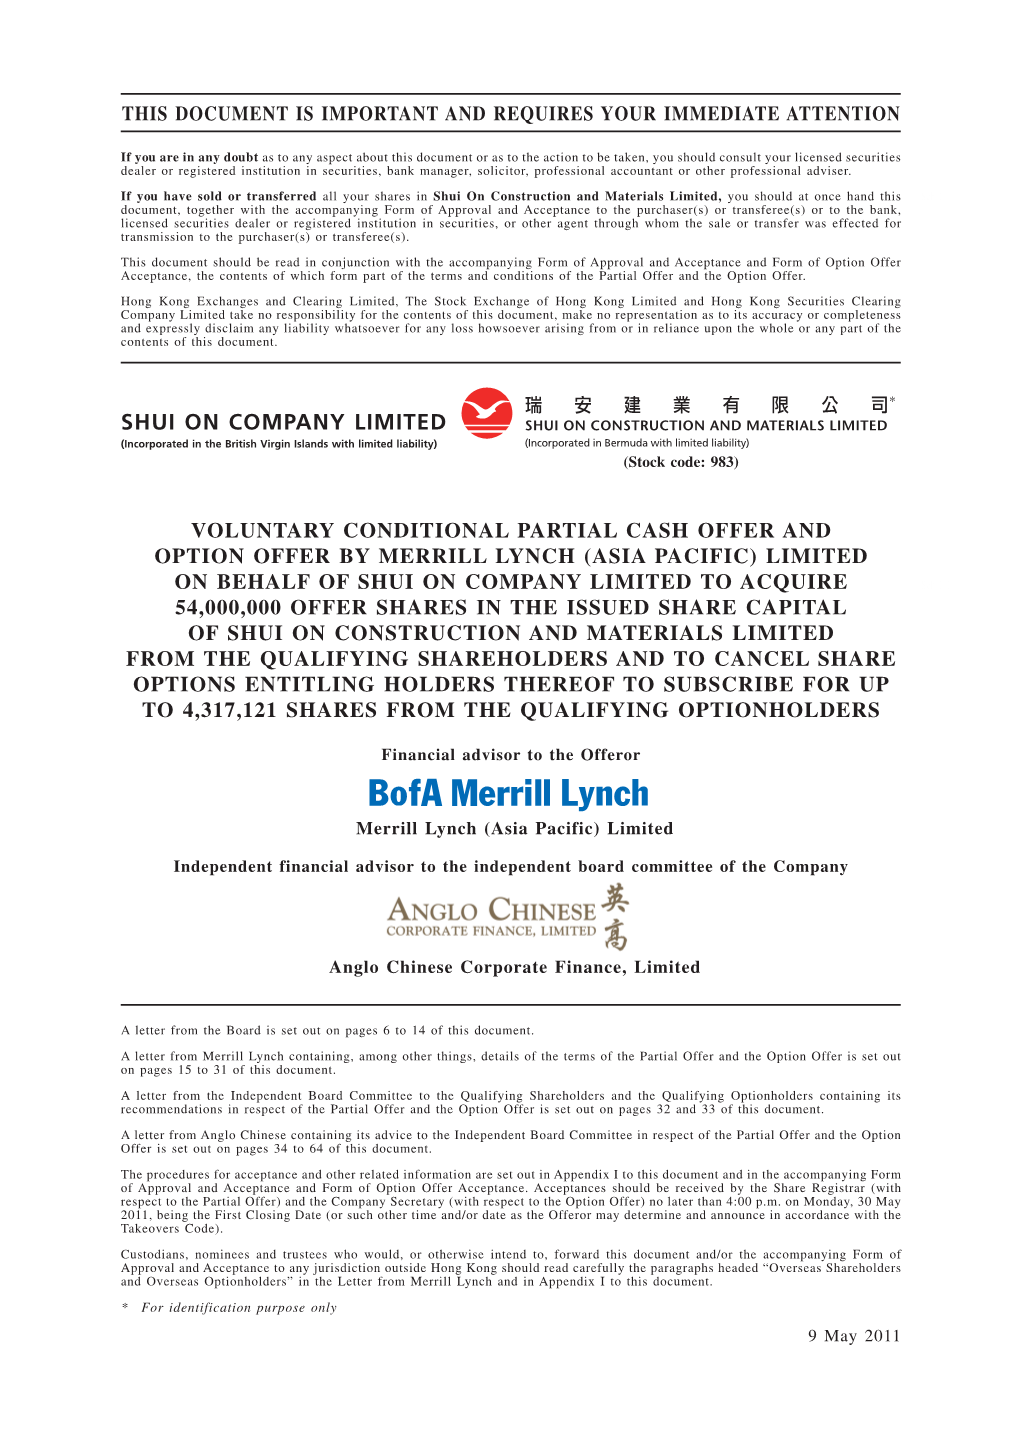 SHUI on COMPANY LIMITED (Incorporated in the British Virgin Islands with Limited Liability) (Stock Code: 983)